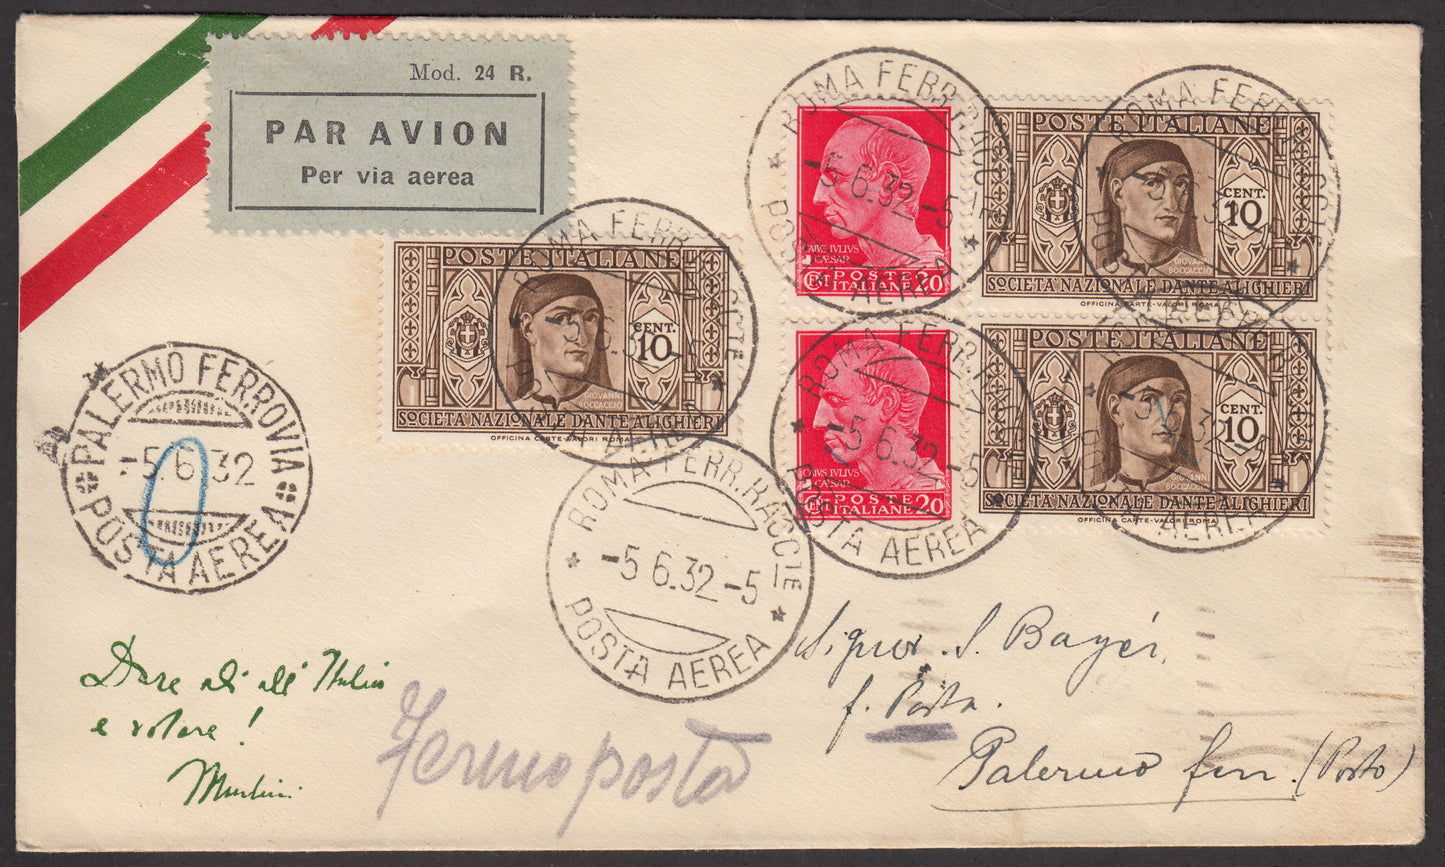 1932 - Airmail, Rome-Palermo 5/6/32 with Imperiale c. 20 carmine two copies + Dante c. 10 brown three specimens (247+303) 